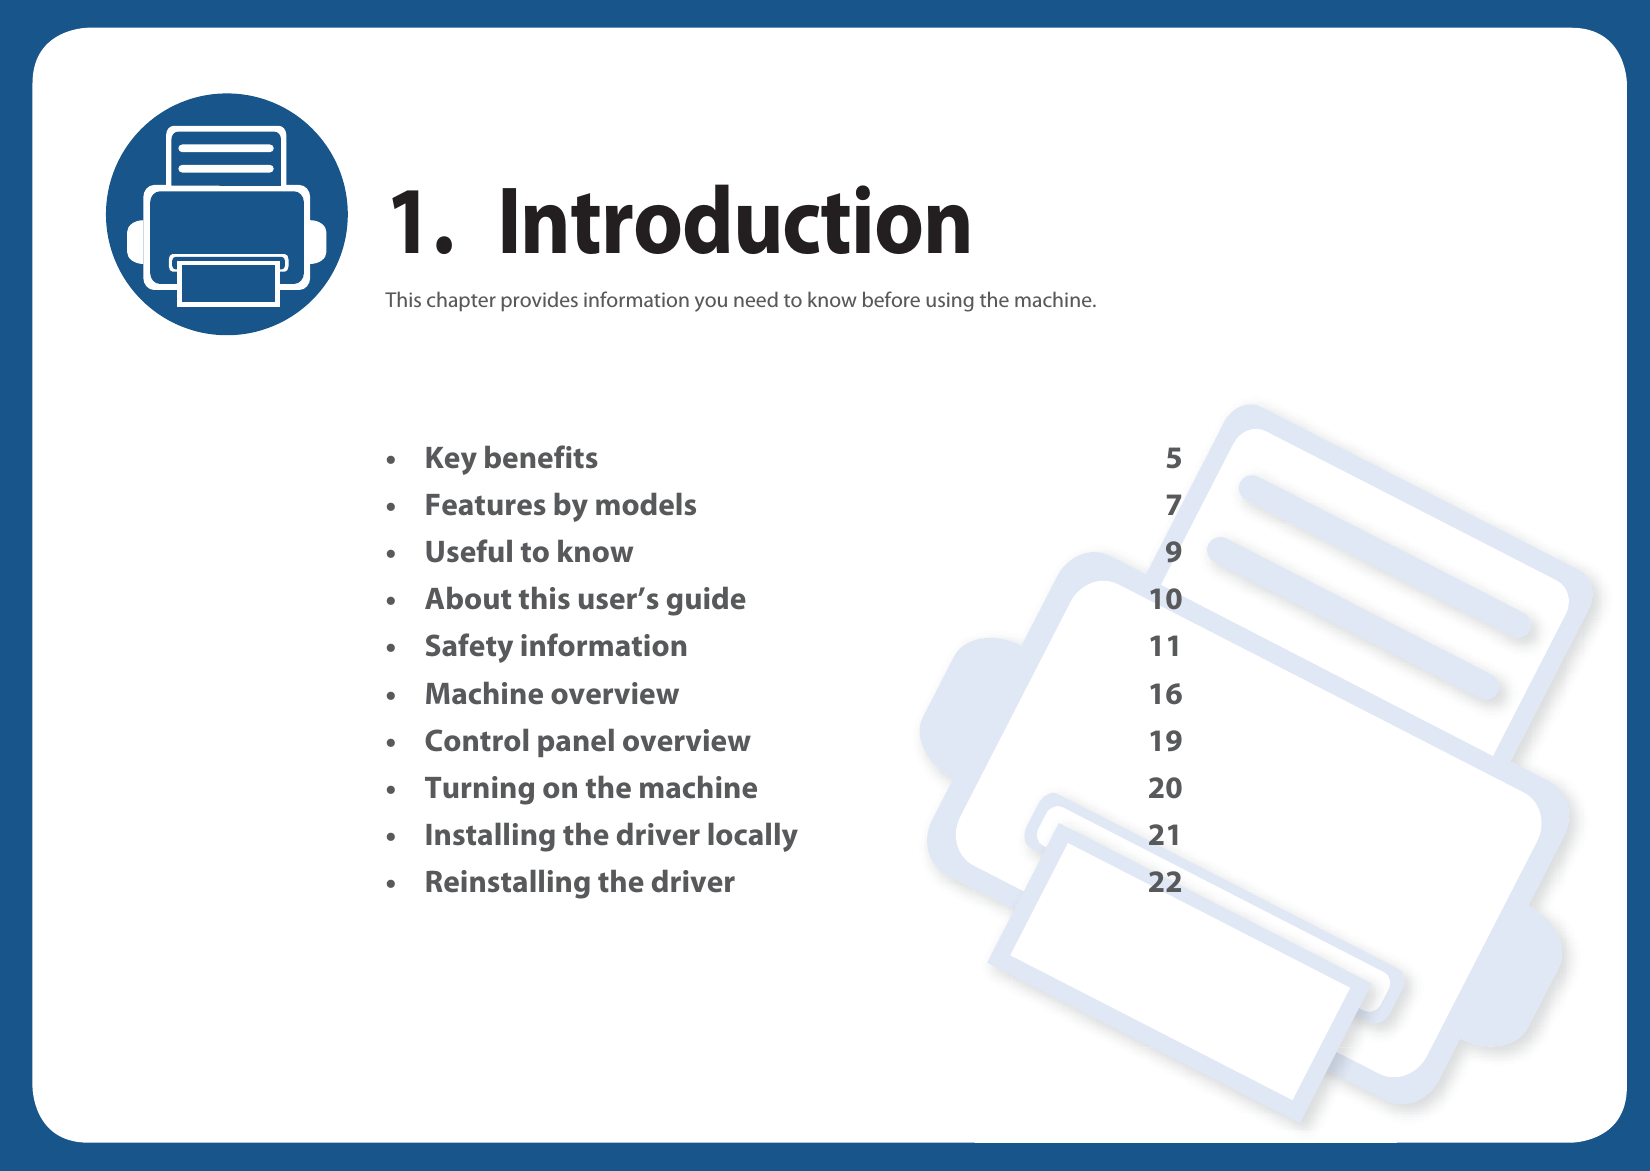 1. IntroductionThis chapter provides information you need to know before using the machine.• Key benefits 5• Features by models 7• Useful to know 9• About this user’s guide 10• Safety information 11• Machine overview 16• Control panel overview 19• Turning on the machine 20• Installing the driver locally 21• Reinstalling the driver 22